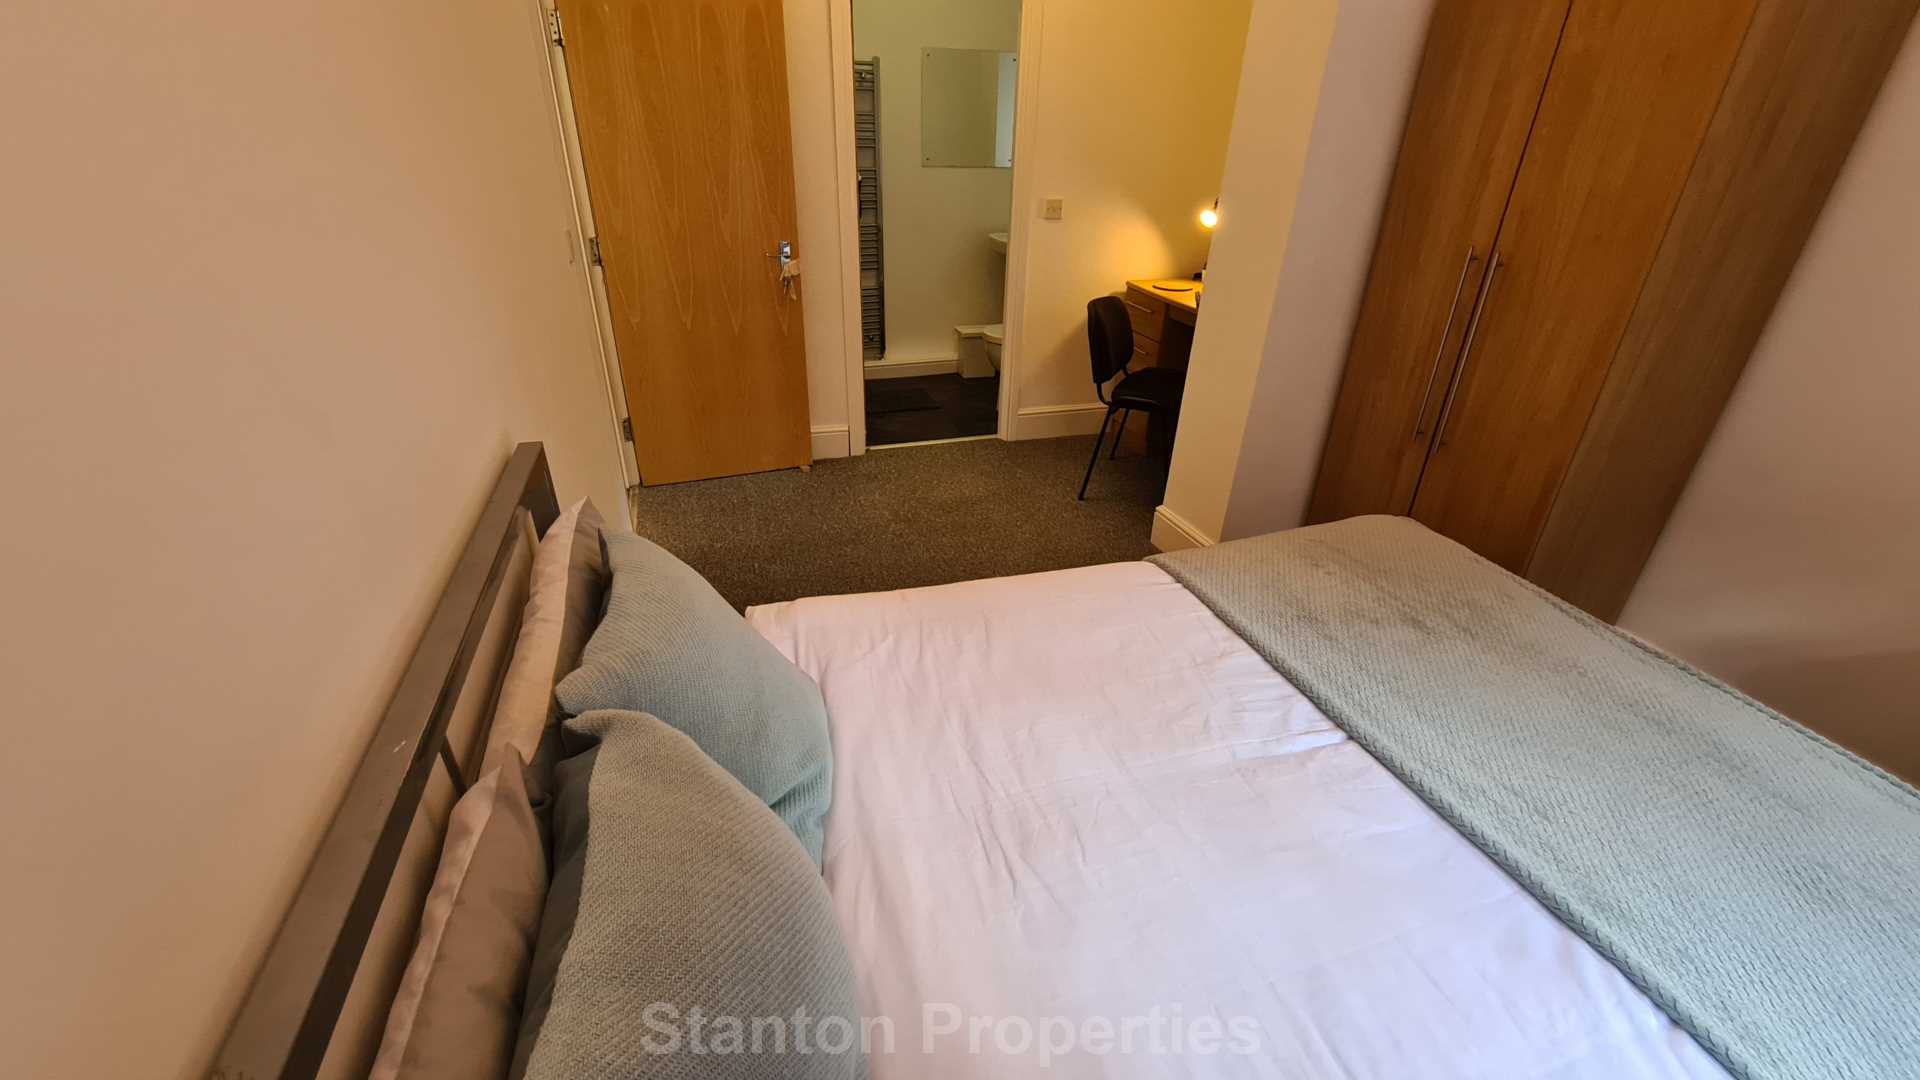 See Video Tour, £130 pppw, Albion Road, Manchester, Image 11